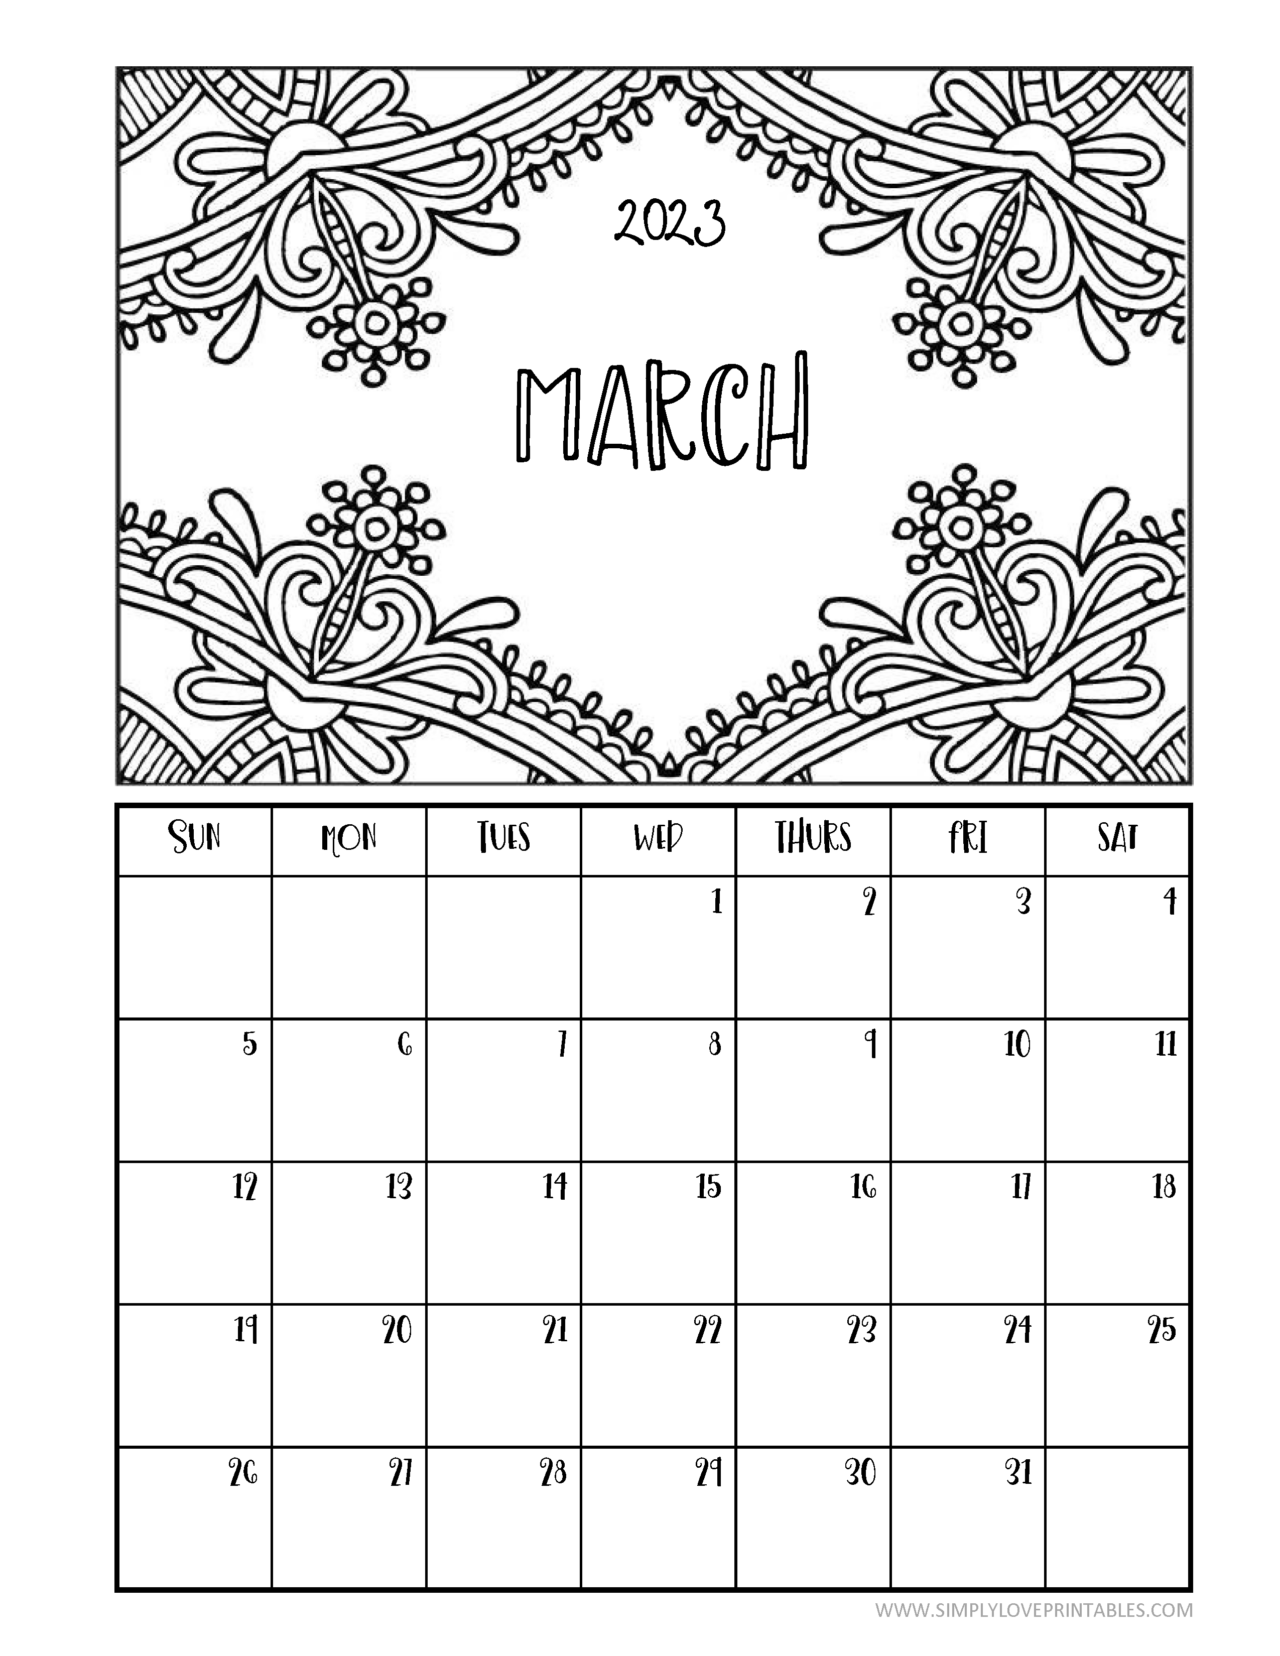 March 2023 Image Coloring Page